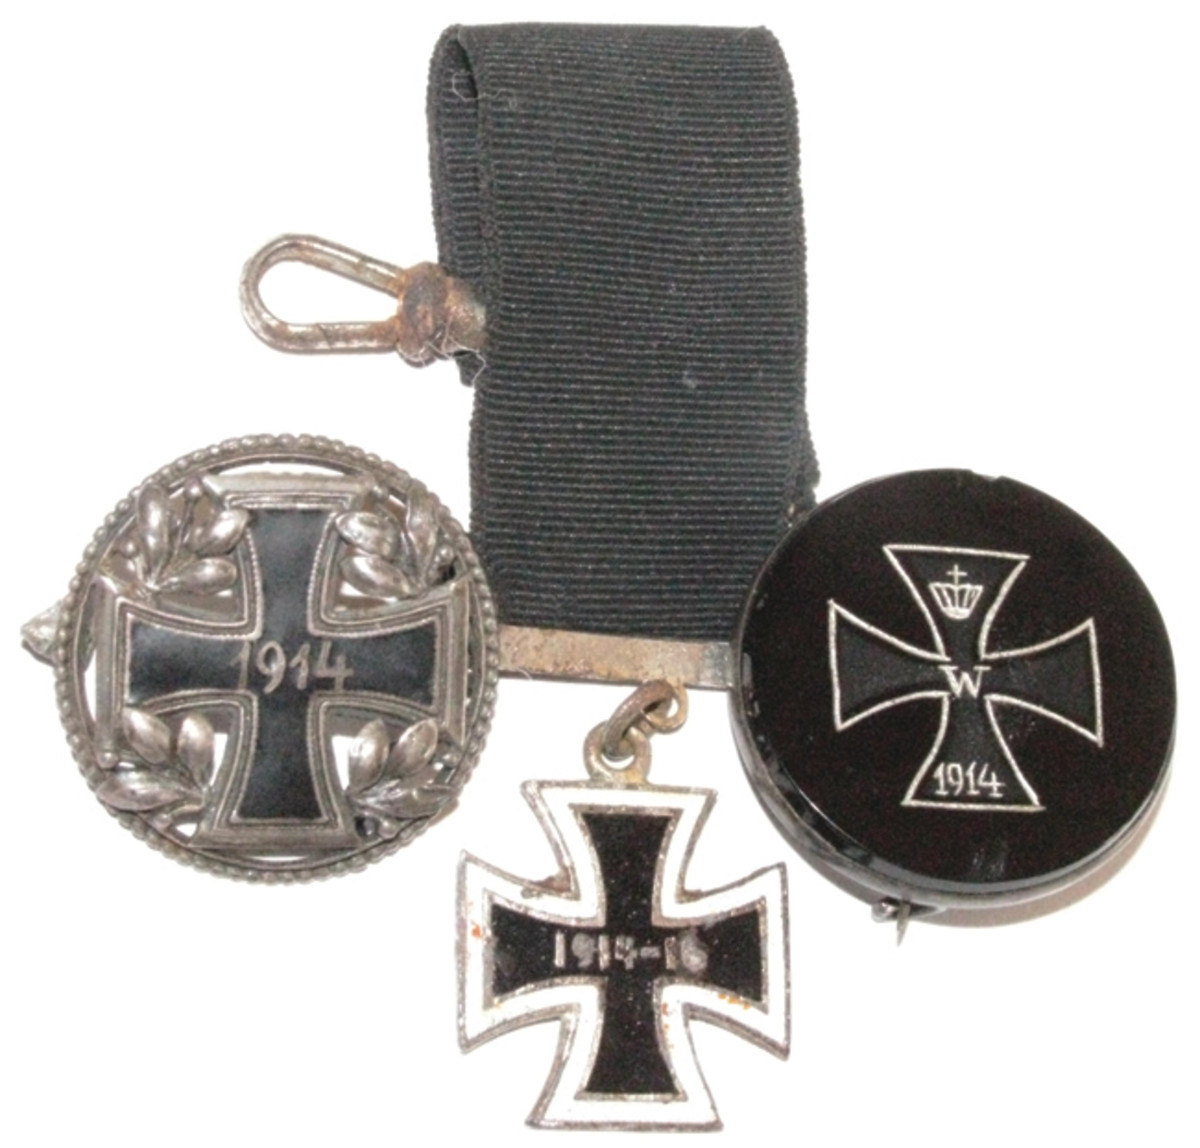  The pride of recipients and that of their families can be seen in the wide variety of Iron Cross-inspired jewelry of the period.